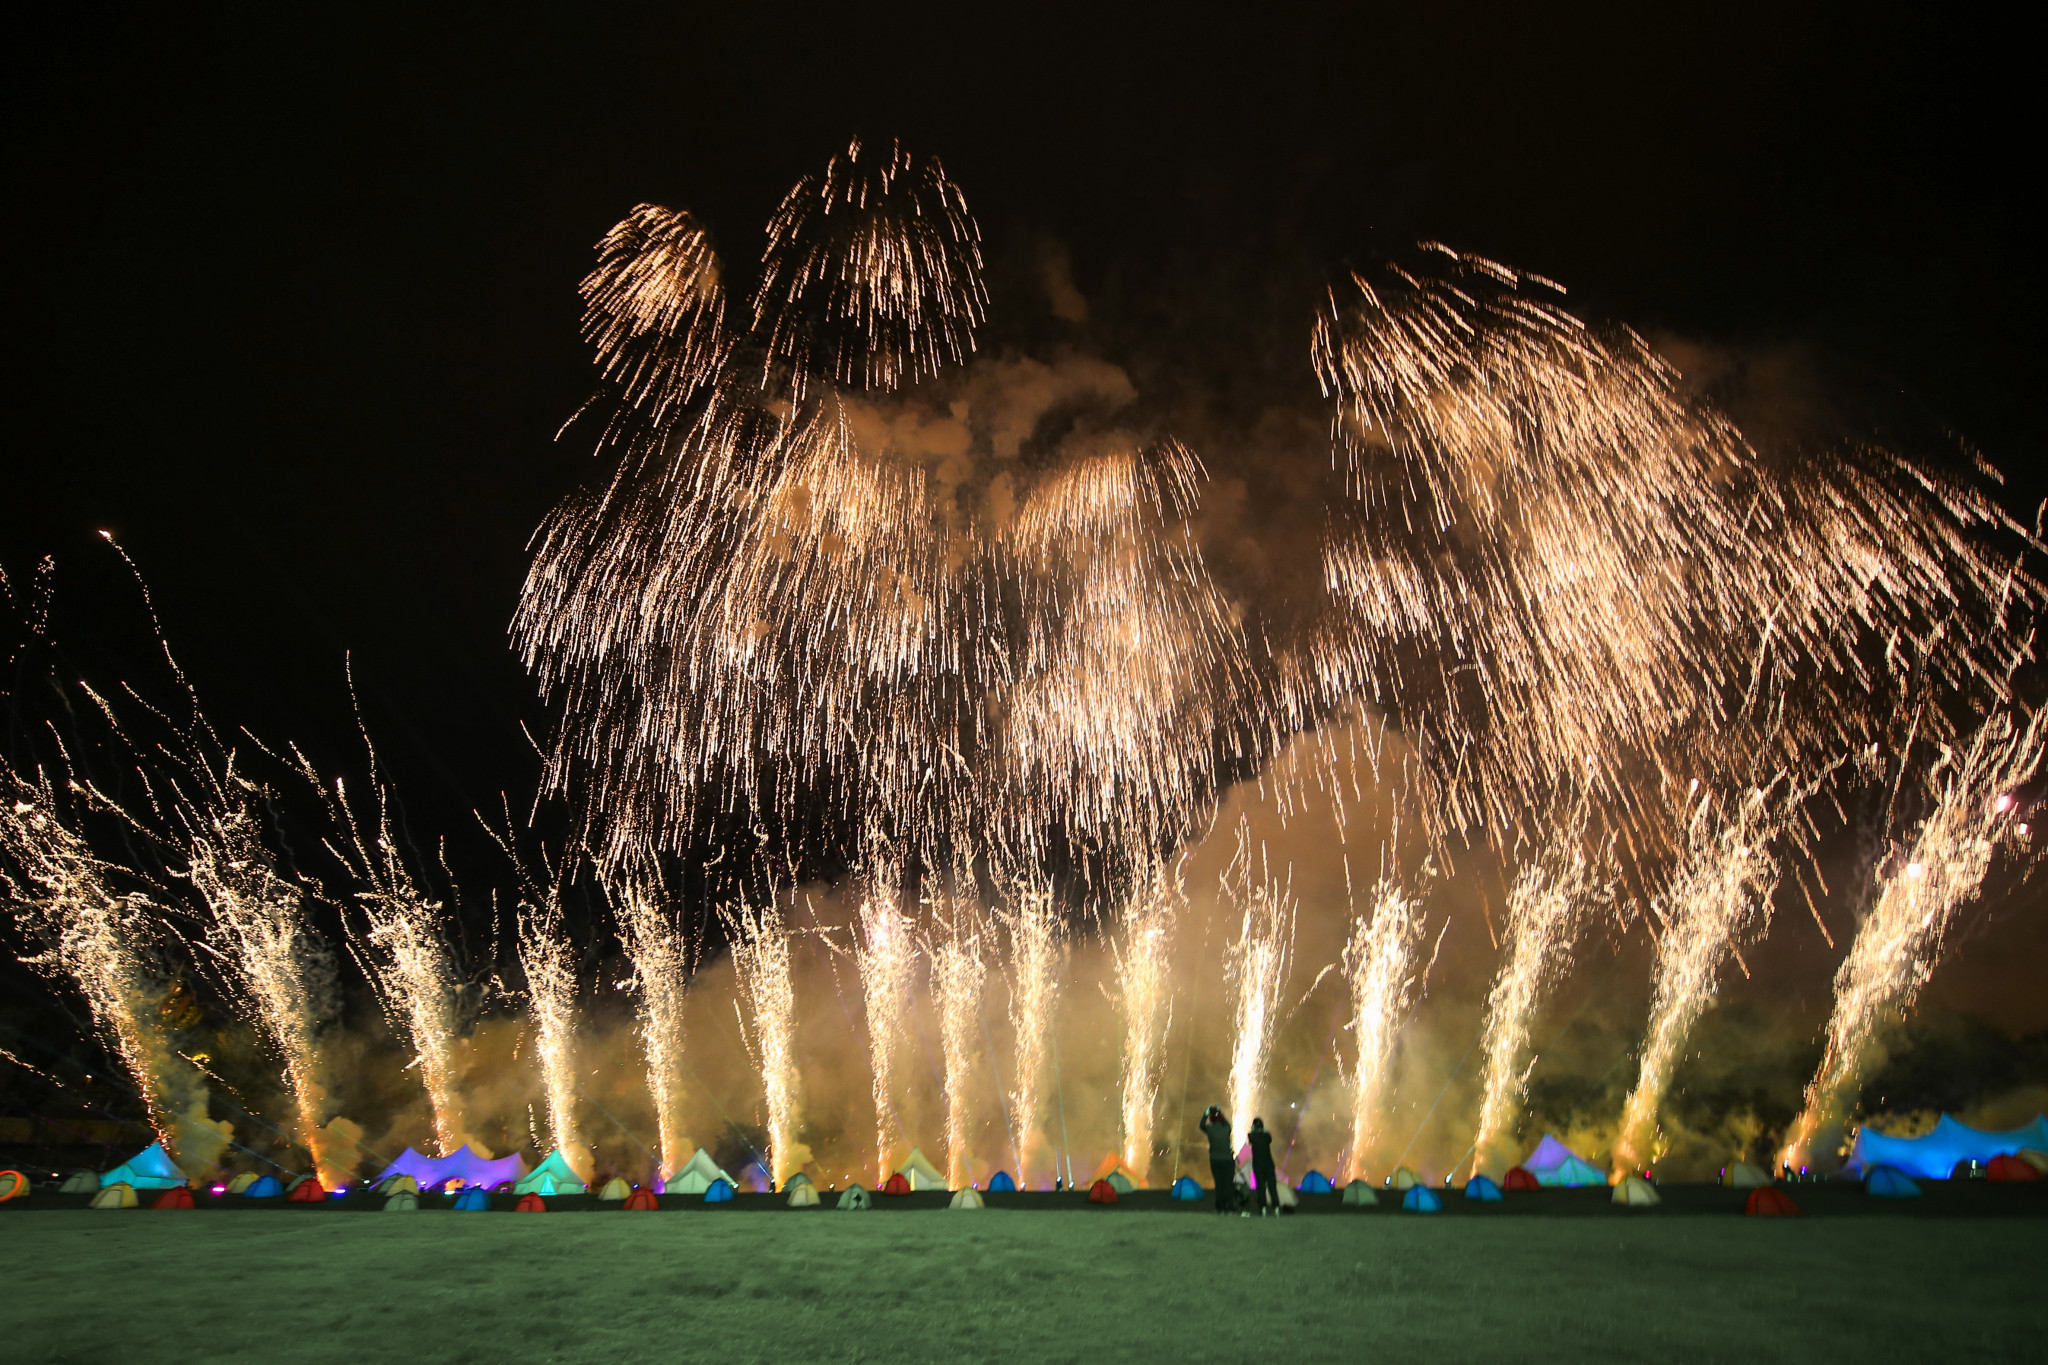 The Chengdu 2021 Closing Ceremony featured a spectacular fireworks display to close proceedings ©FISU